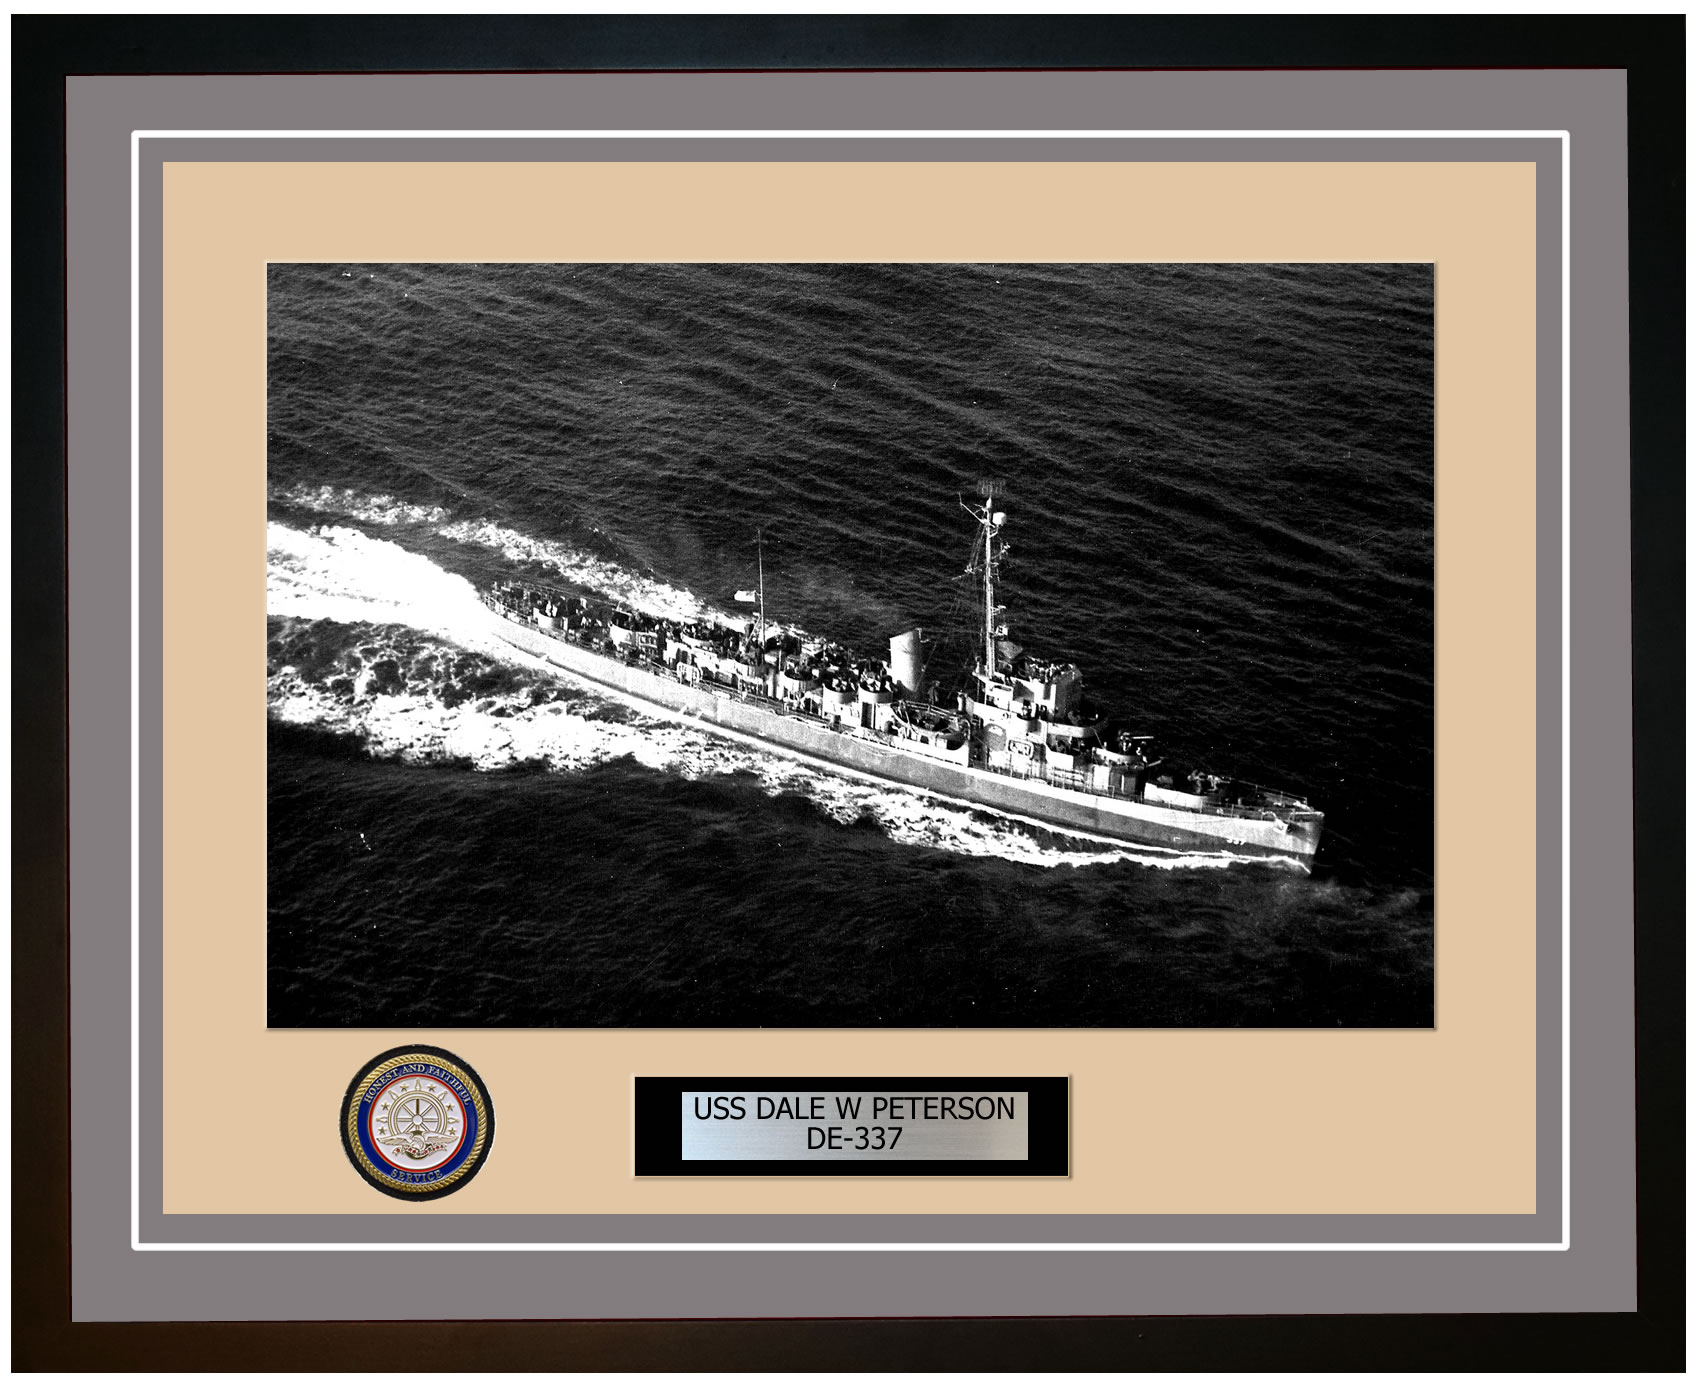 USS Dale DLG 19 Personalized Canvas Ship Photo Print Navy Veteran Gift